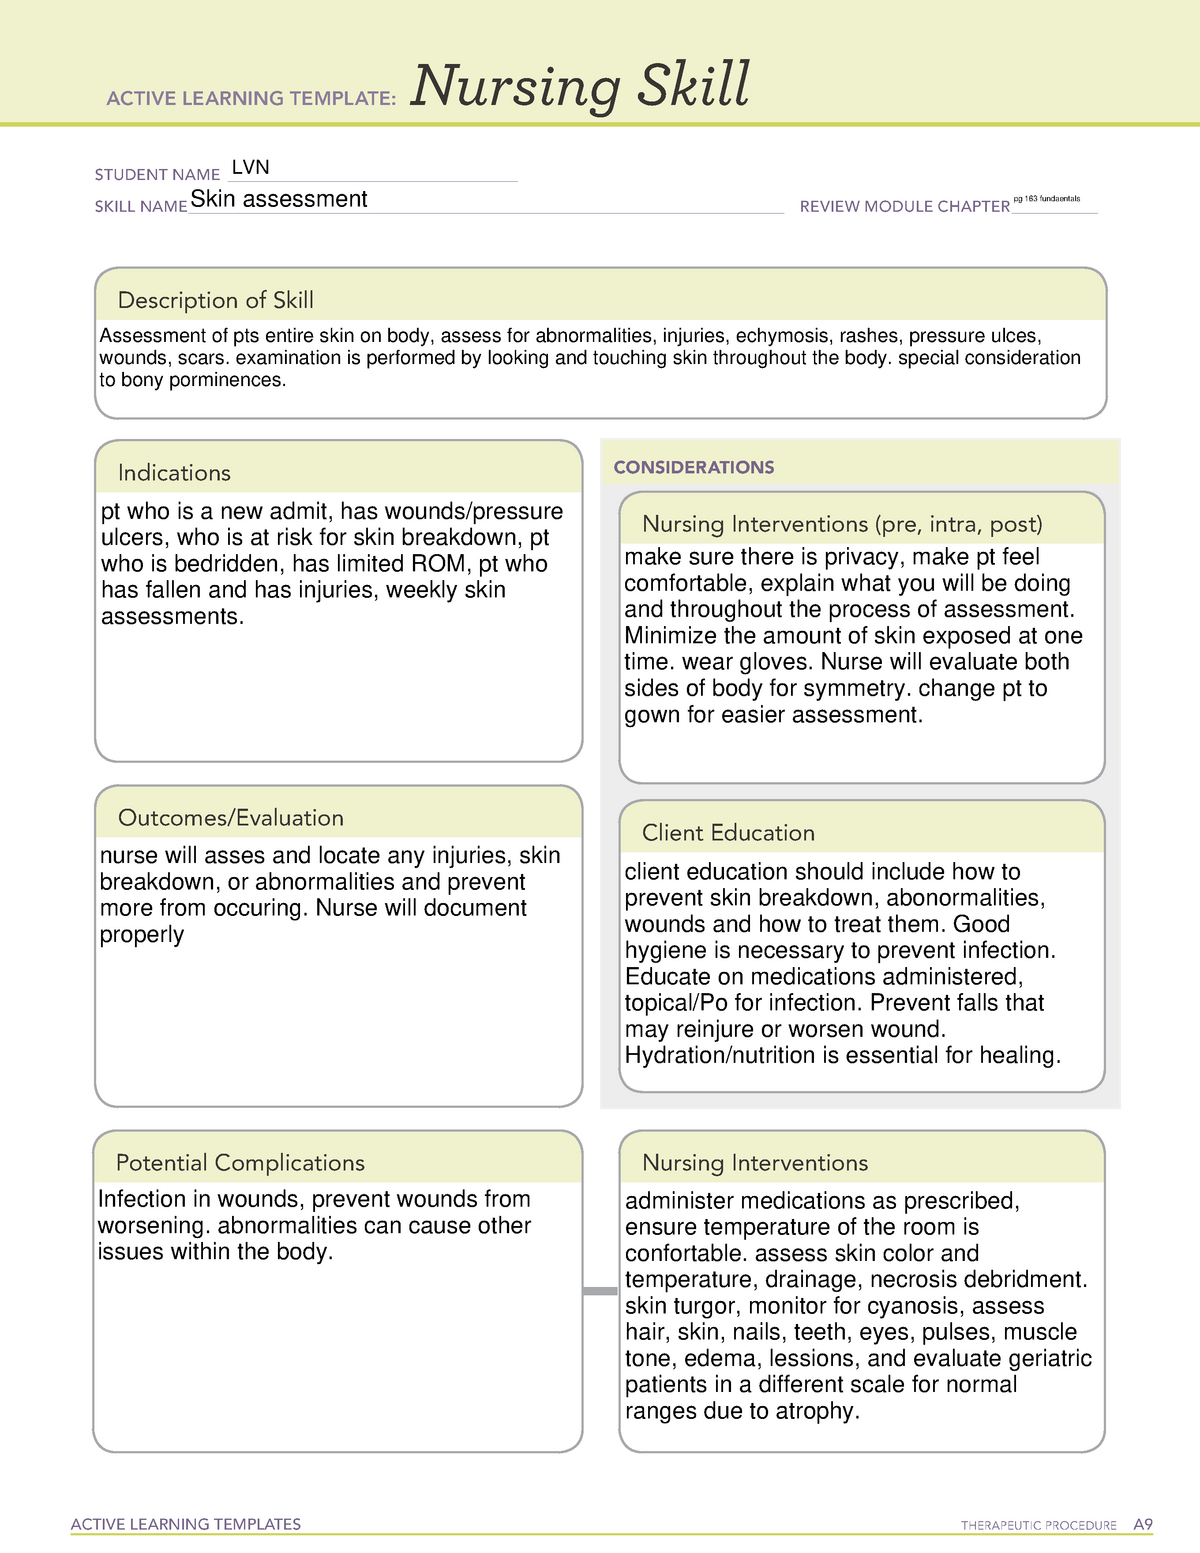 Skin assessment template - ACTIVE LEARNING TEMPLATES THERAPEUTIC ...